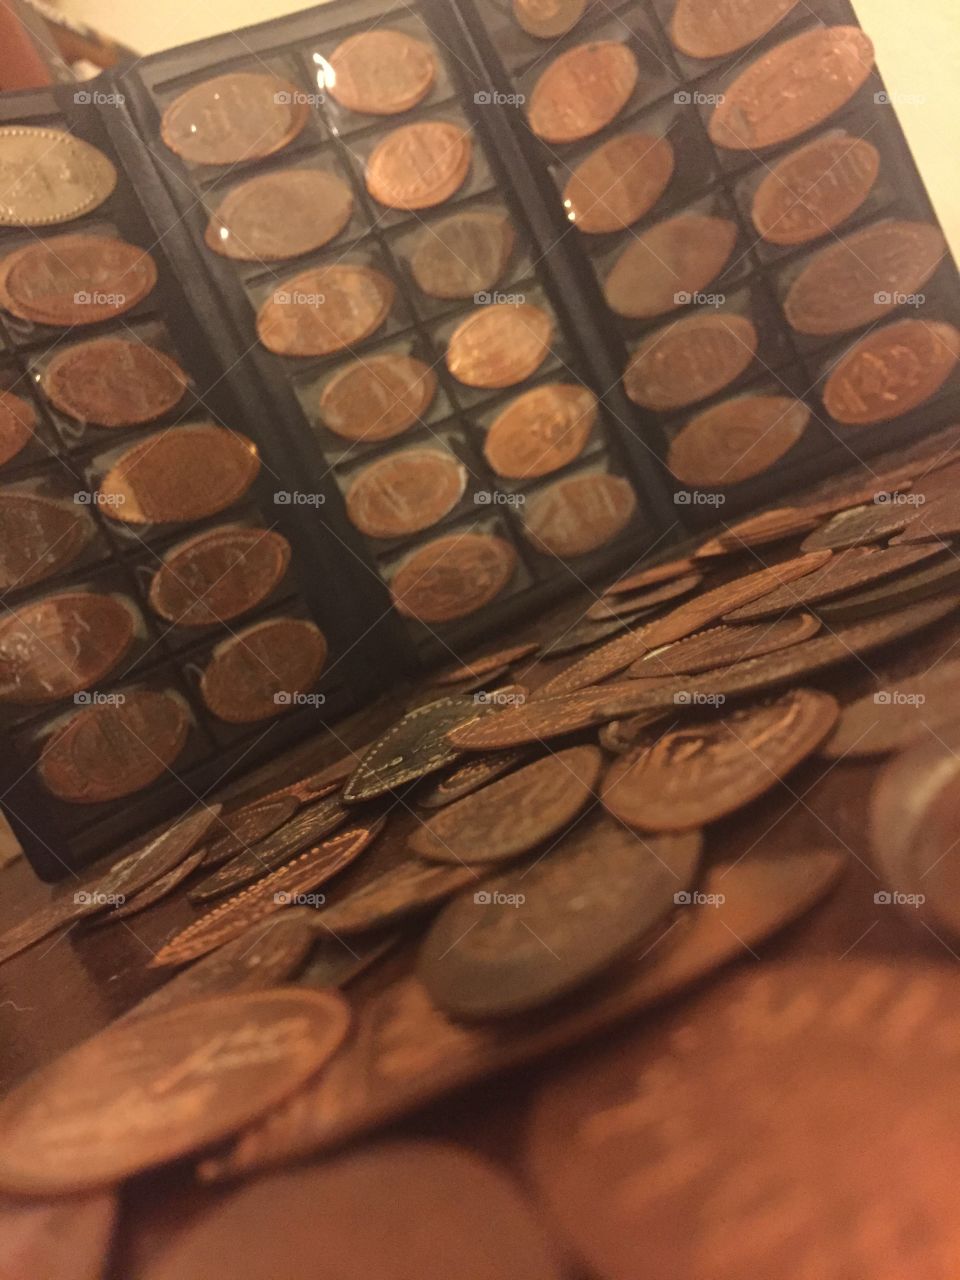 Scattered souvenir pennies from my sons many adventures 